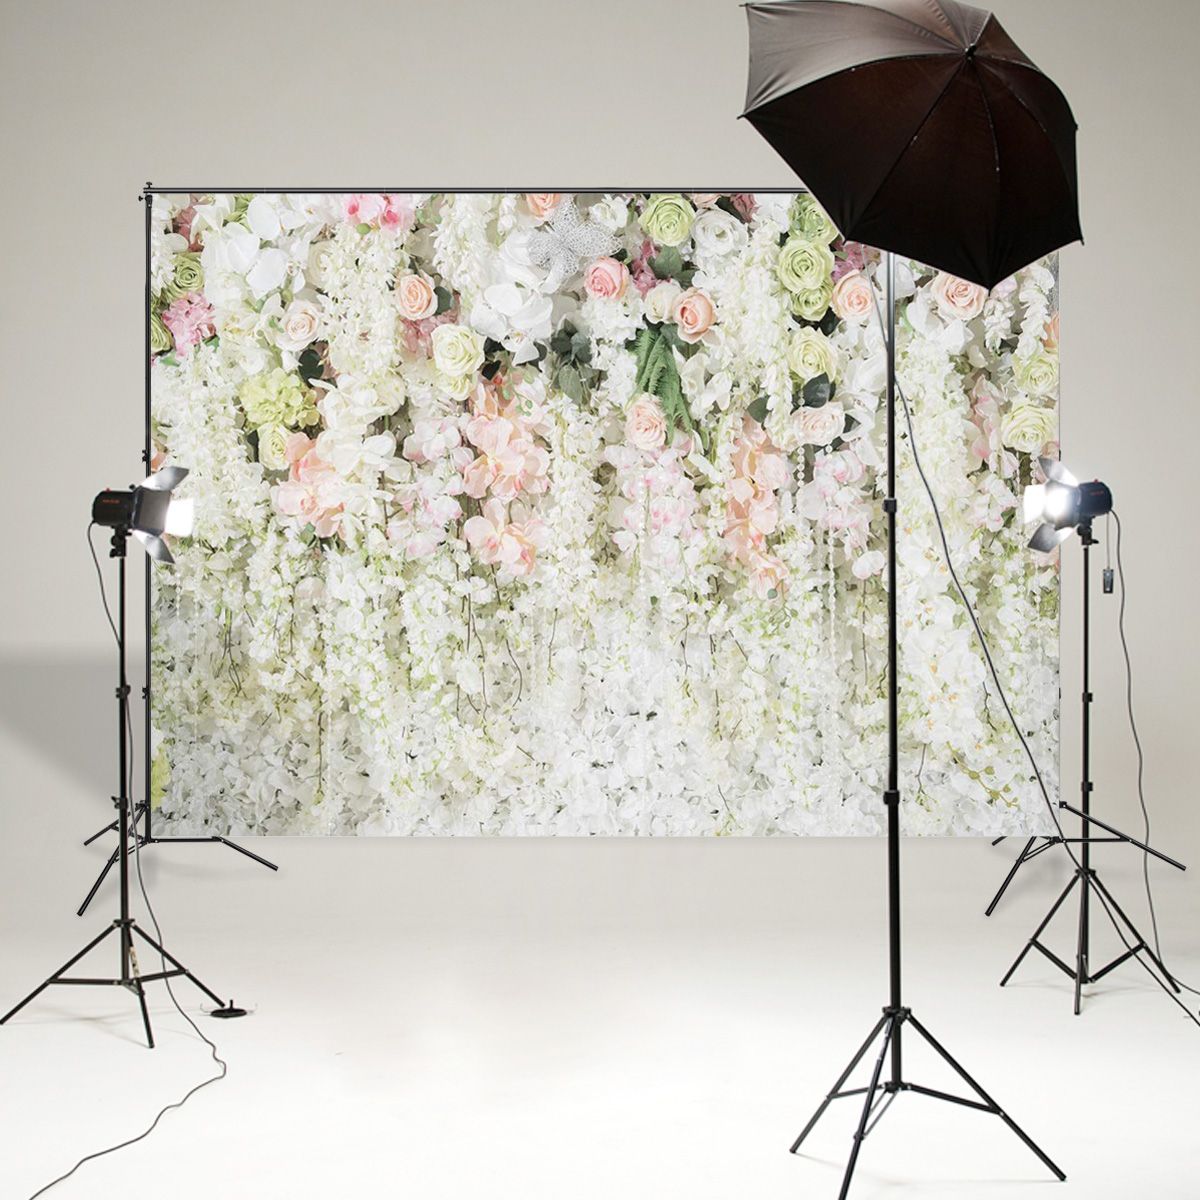 09x15m-15x21m-18x27m-White-Flowers-Sea-Photography-Studio-Wall-Backdrop-Photo-Background-Cloth-for-B-1718838